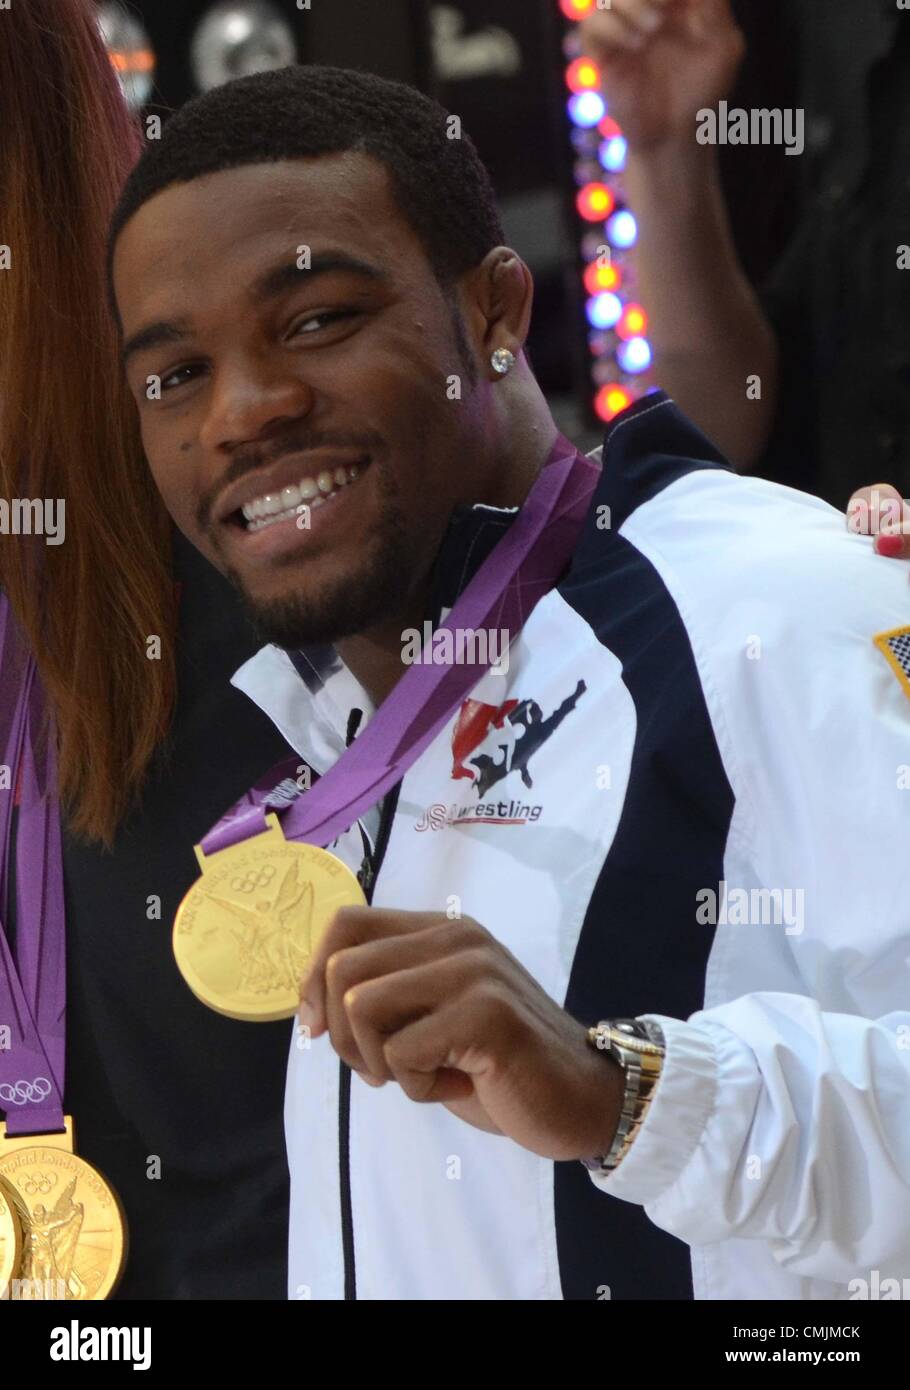 17th Aug 2012. Jordan Burroughs in attendance for Olympians Visit the NBC Today Show, Rockefeller Plaza, New York, NY August 17, 2012. Photo By: Derek Storm/Everett Collection/ Alamy Live News Stock Photo